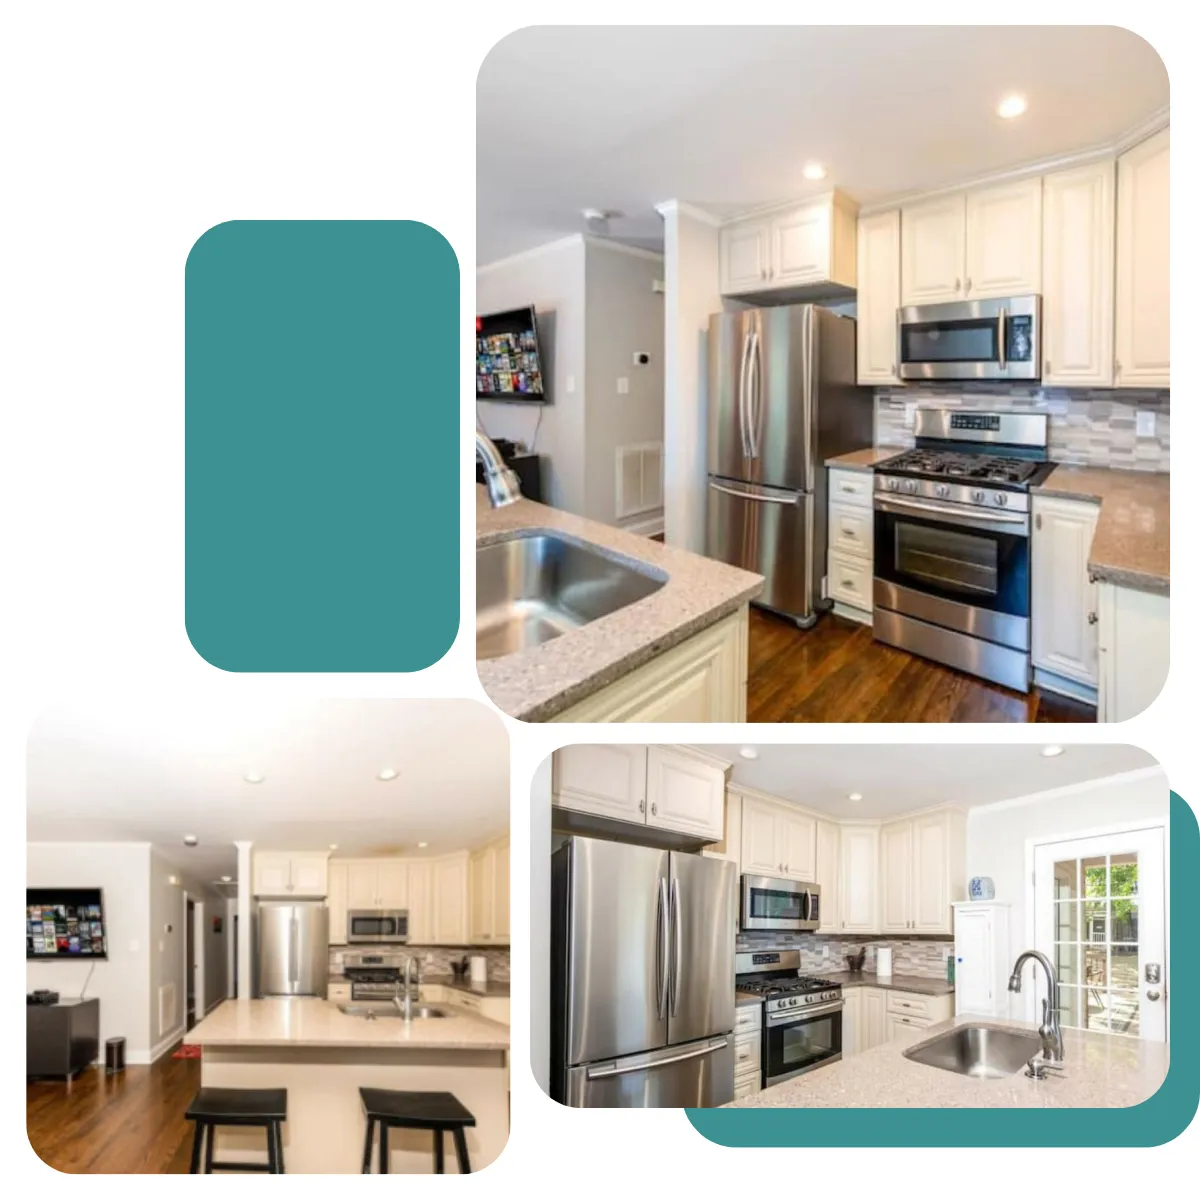 At Wilmore Rental, the kitchen has fancy stainless steel appliances like a gas stove, fridge, microwave, and dishwasher, with plenty of cabinets and sleek countertops for easy cooking.